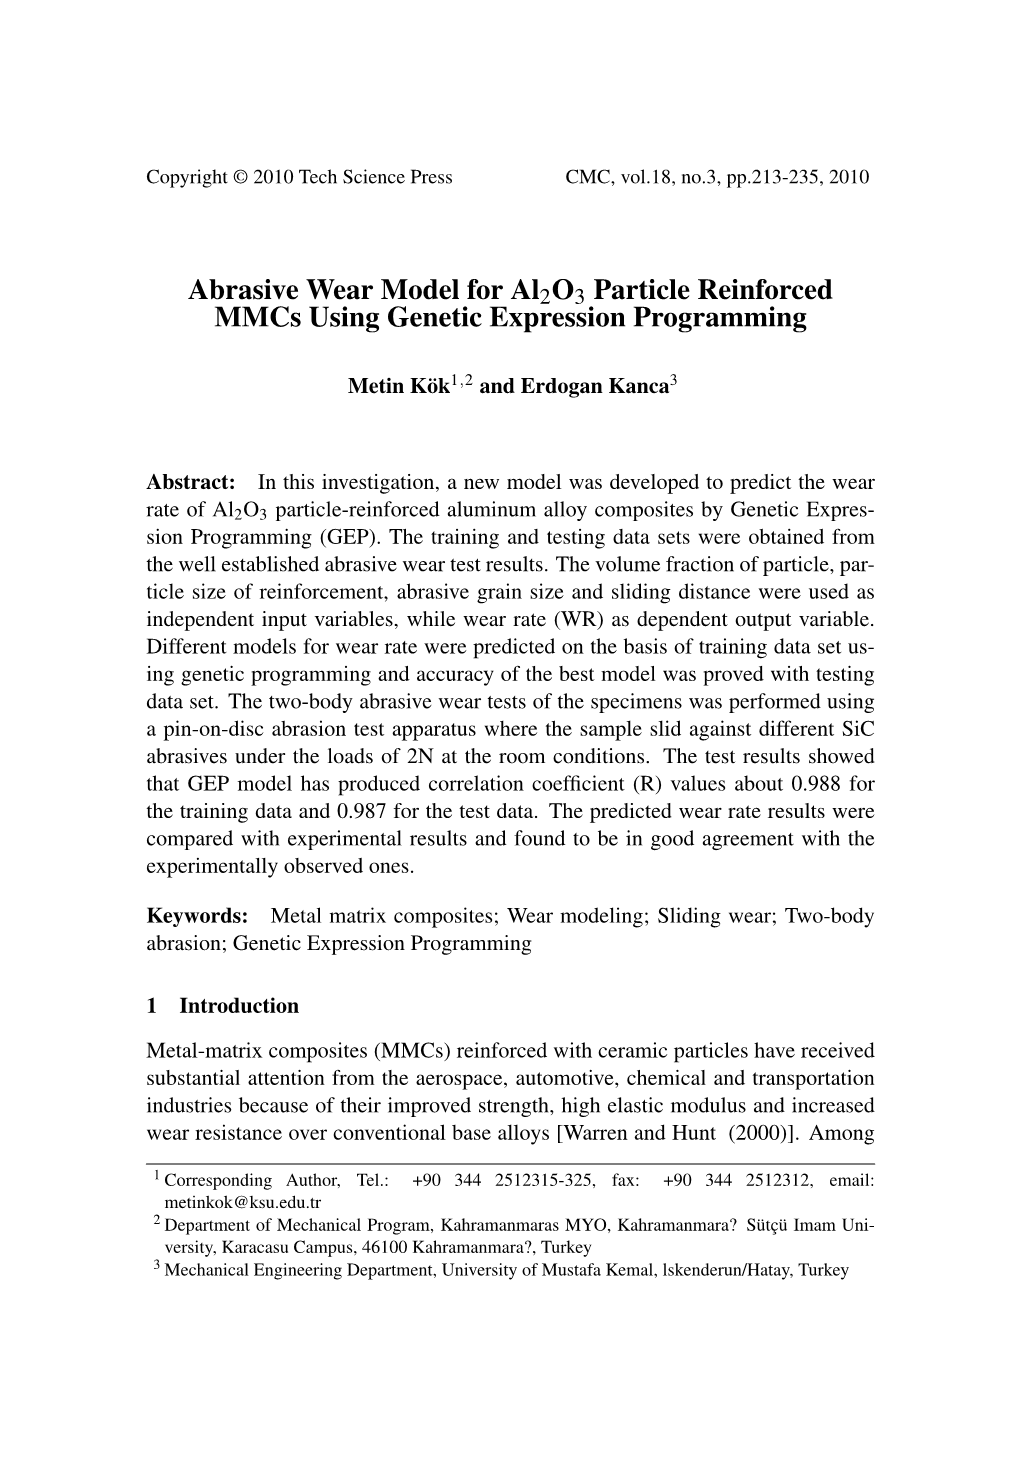 Abrasive Wear Model for Al2o3 Particle Reinforced Mmcs Using Genetic Expression Programming